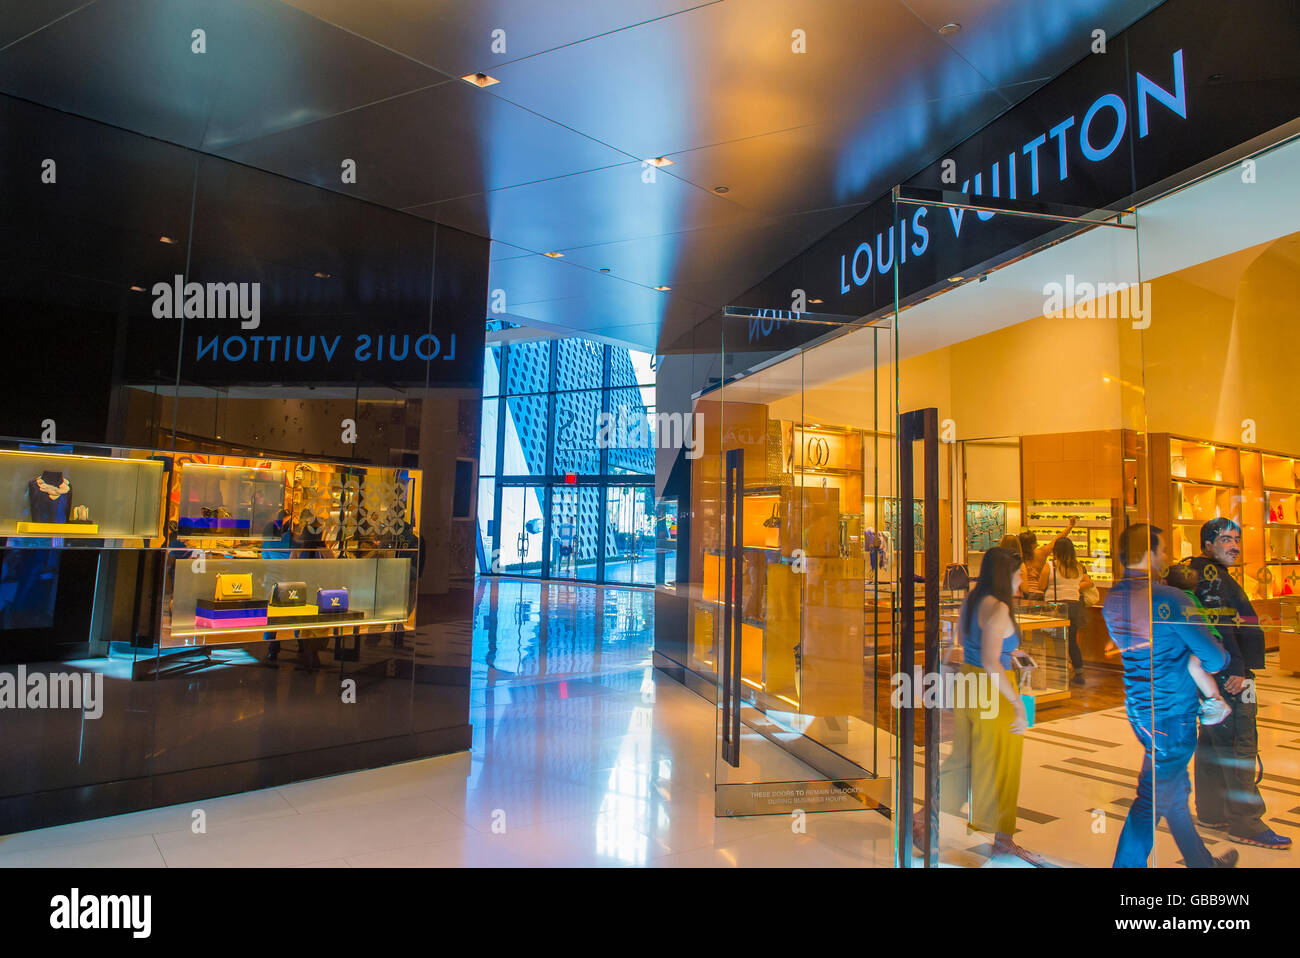 AVENTURA, USA - AUGUST 23, 2018: Louis Vuitton Famous Boutique In Aventura  Mall. Louis Vuitton Is A French Fashion House And Luxury Retail Company  Founded In 1854 By Louis Vuitton Stock Photo